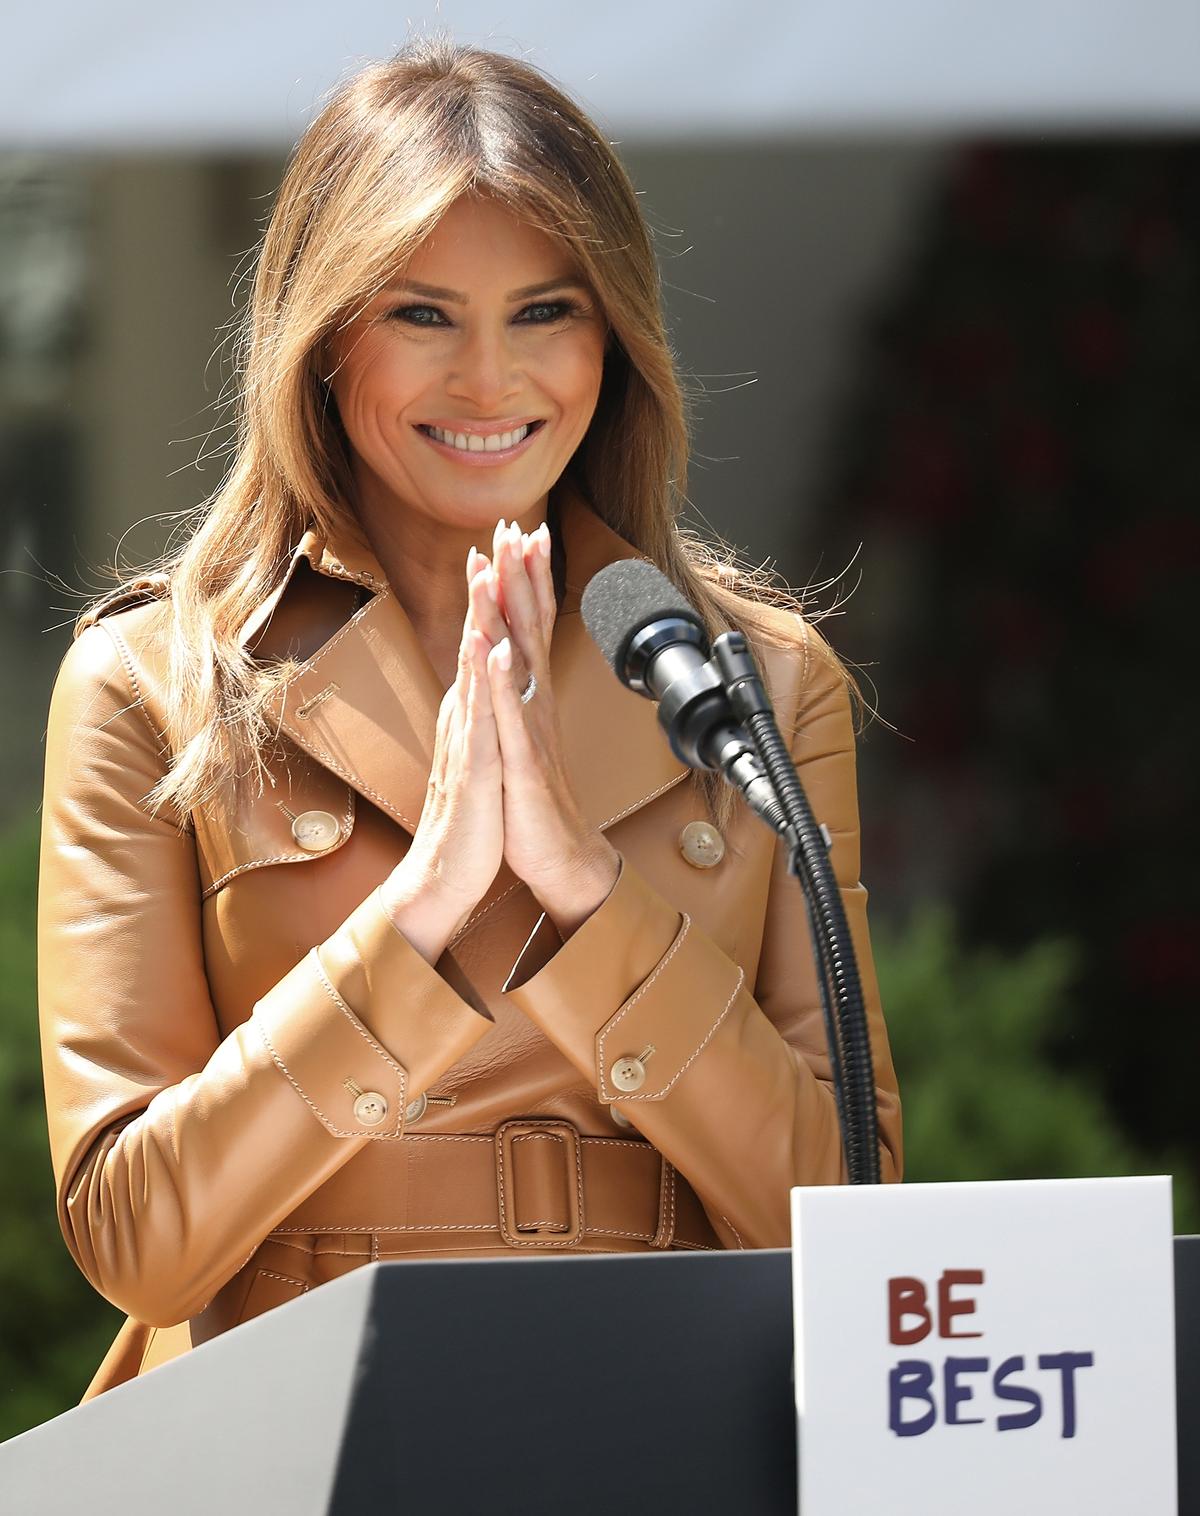 U.S. first lady Melania Trump speaks in the Rose Garden of the White House in Washington, D.C., on May 7, 2018. (Win McNamee/Getty Images)